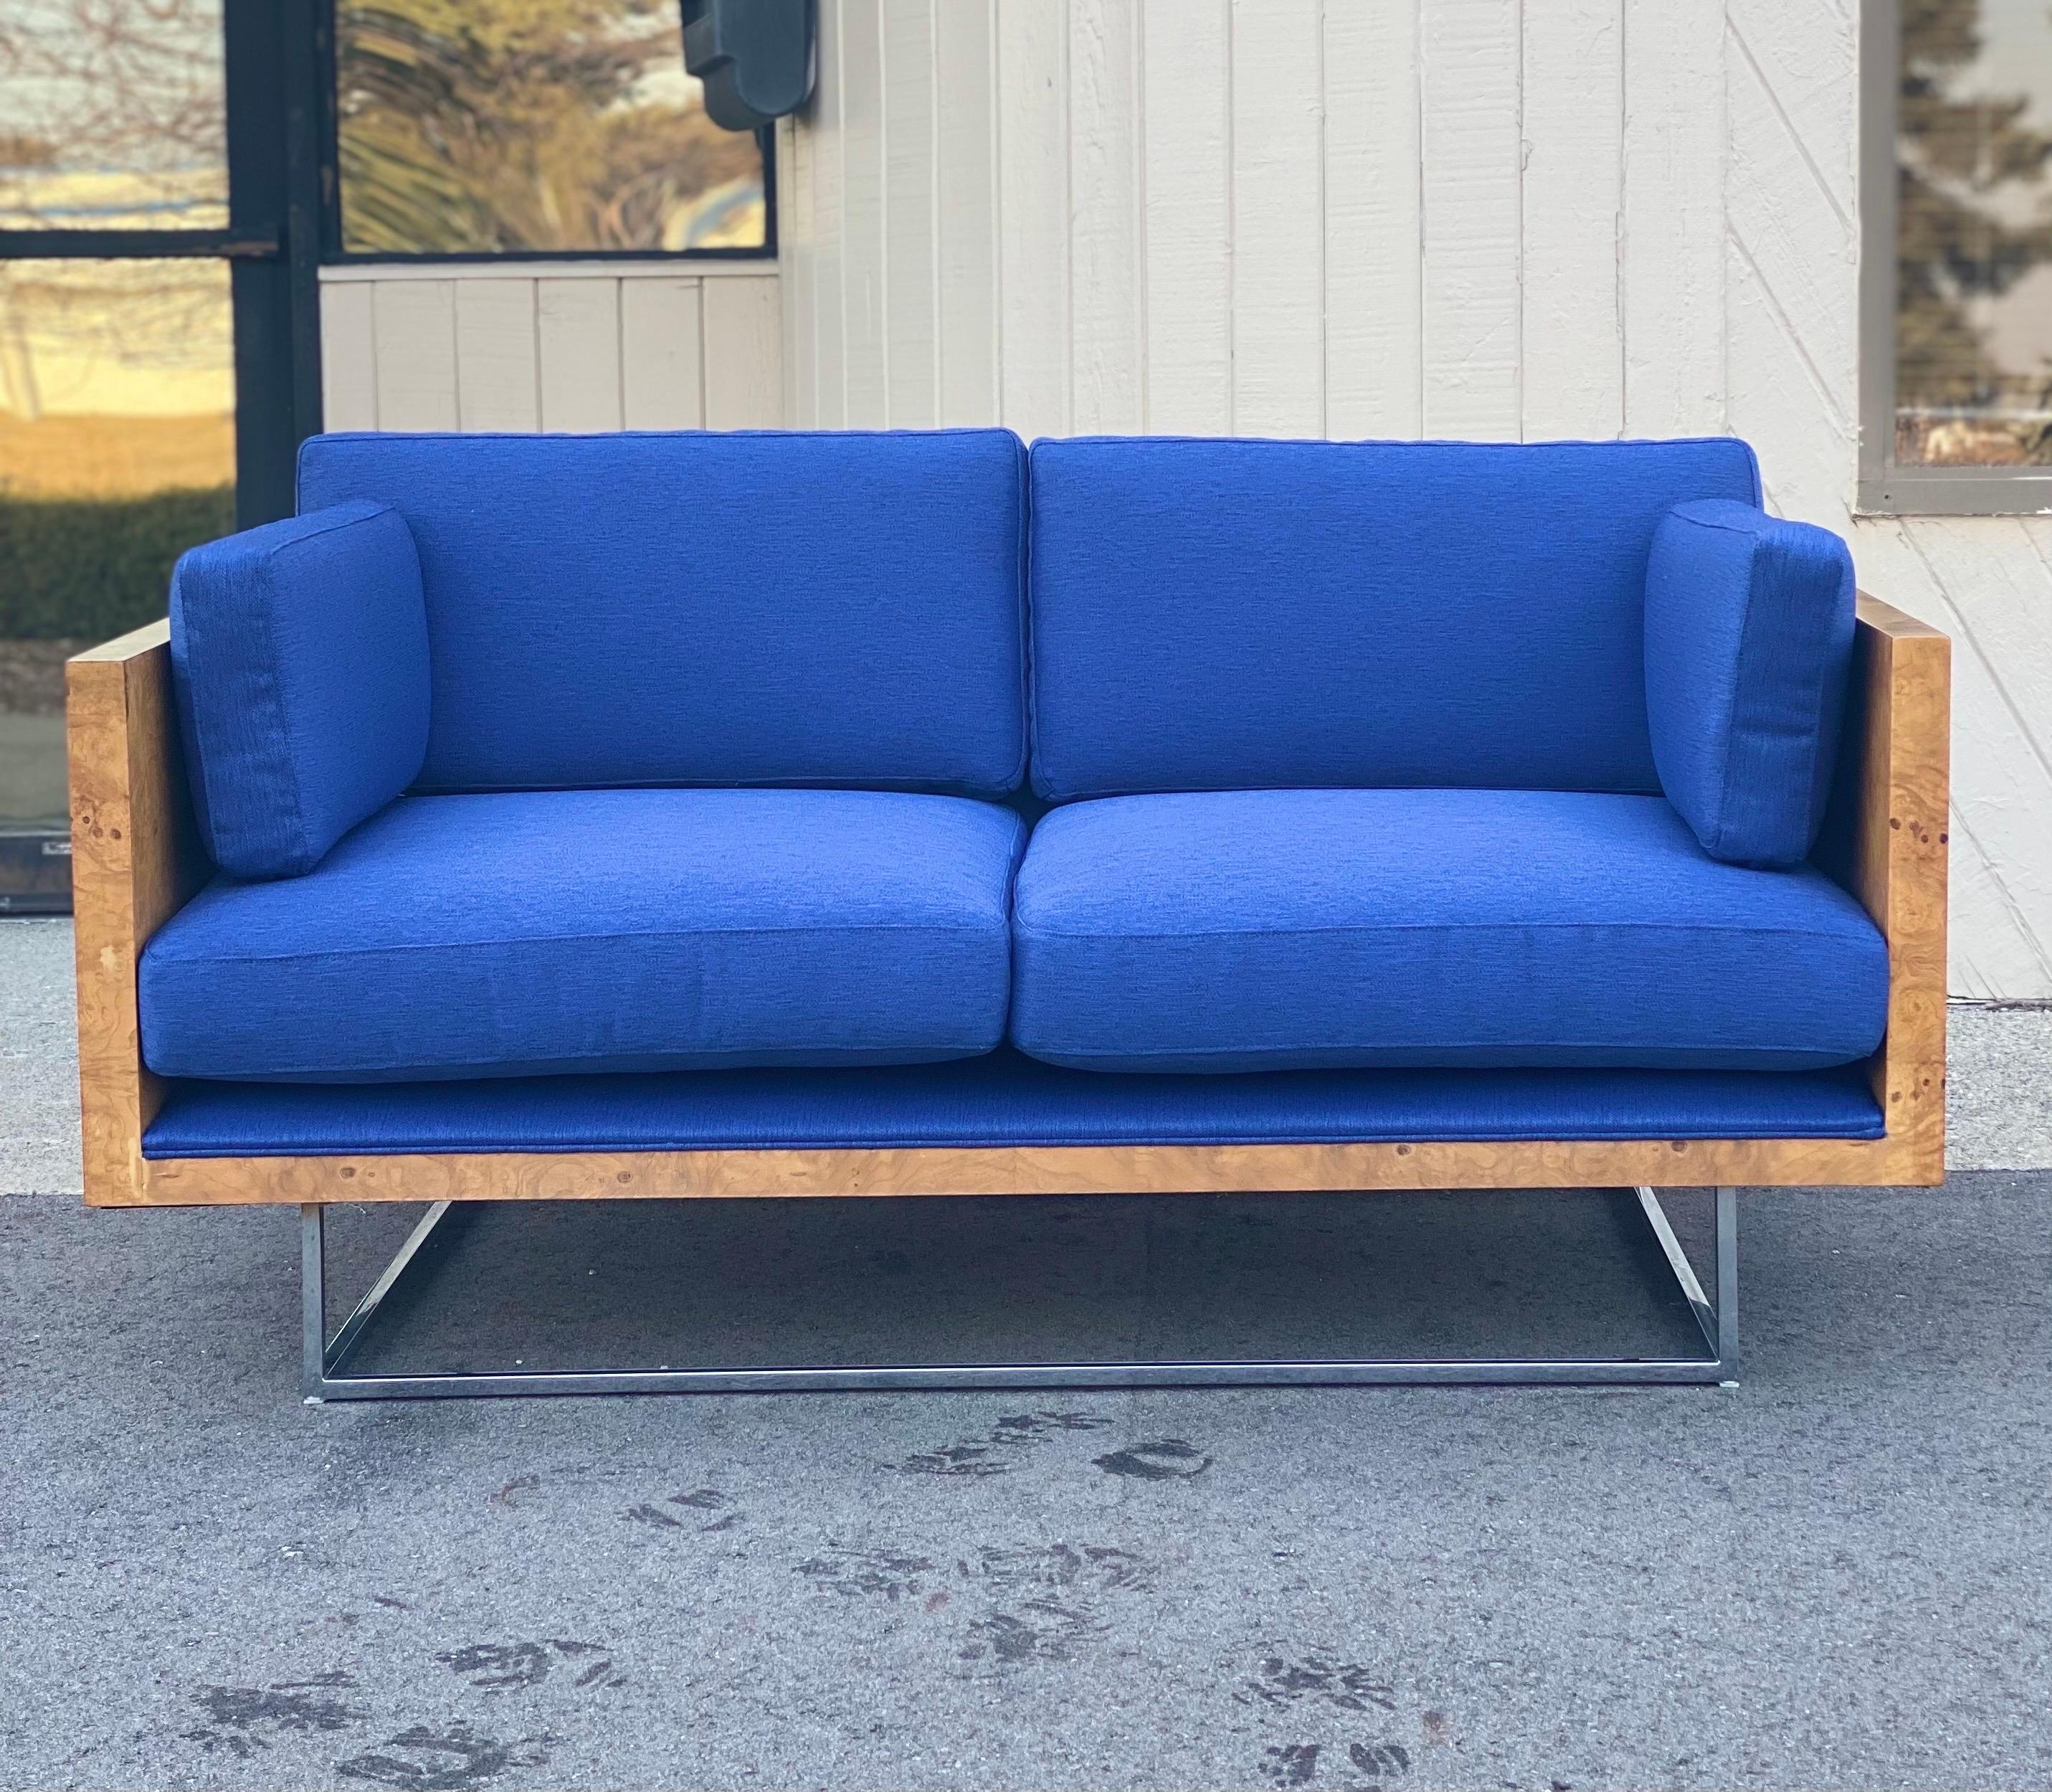 We are very pleased to offer a pair of case study sofas by Milo Baughman for Thayer Coggin, circa 1972. This stunning pair showcases a burl wood case and a chrome base that gives the illusion of a floating seat. A savvy statement pair for elevating